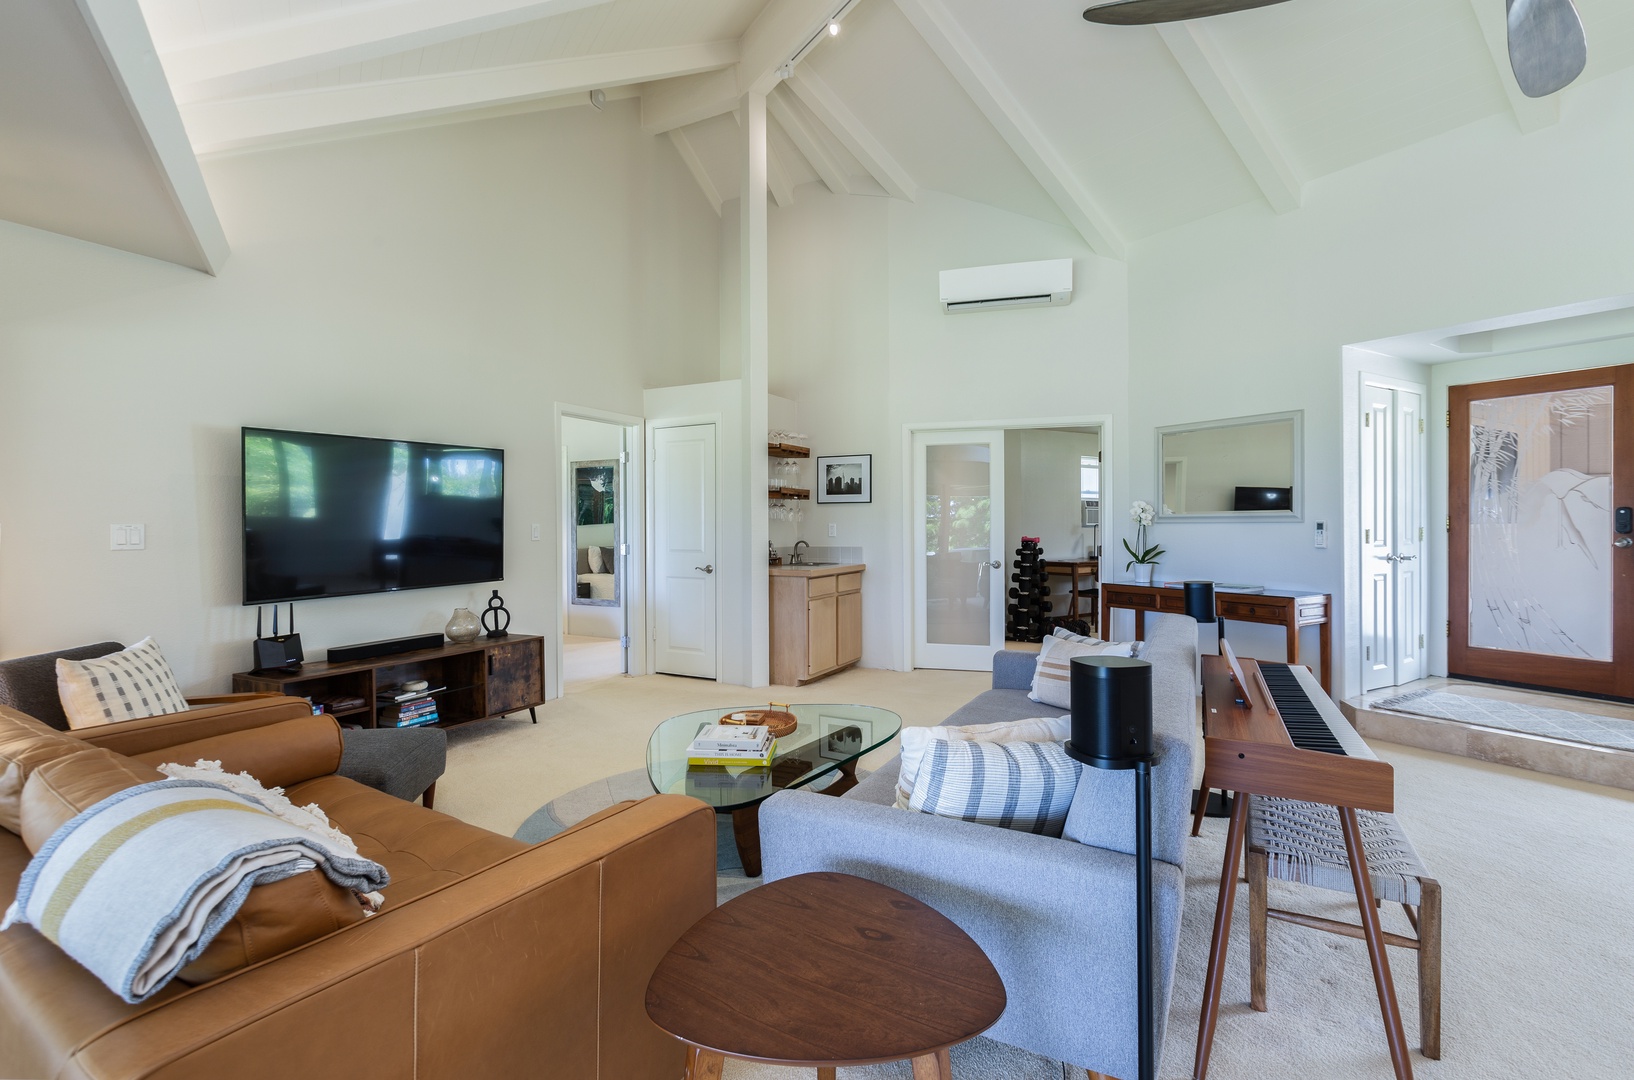 Princeville Vacation Rentals, Wai Puna - Curl up and catch up with family and friends in the living area